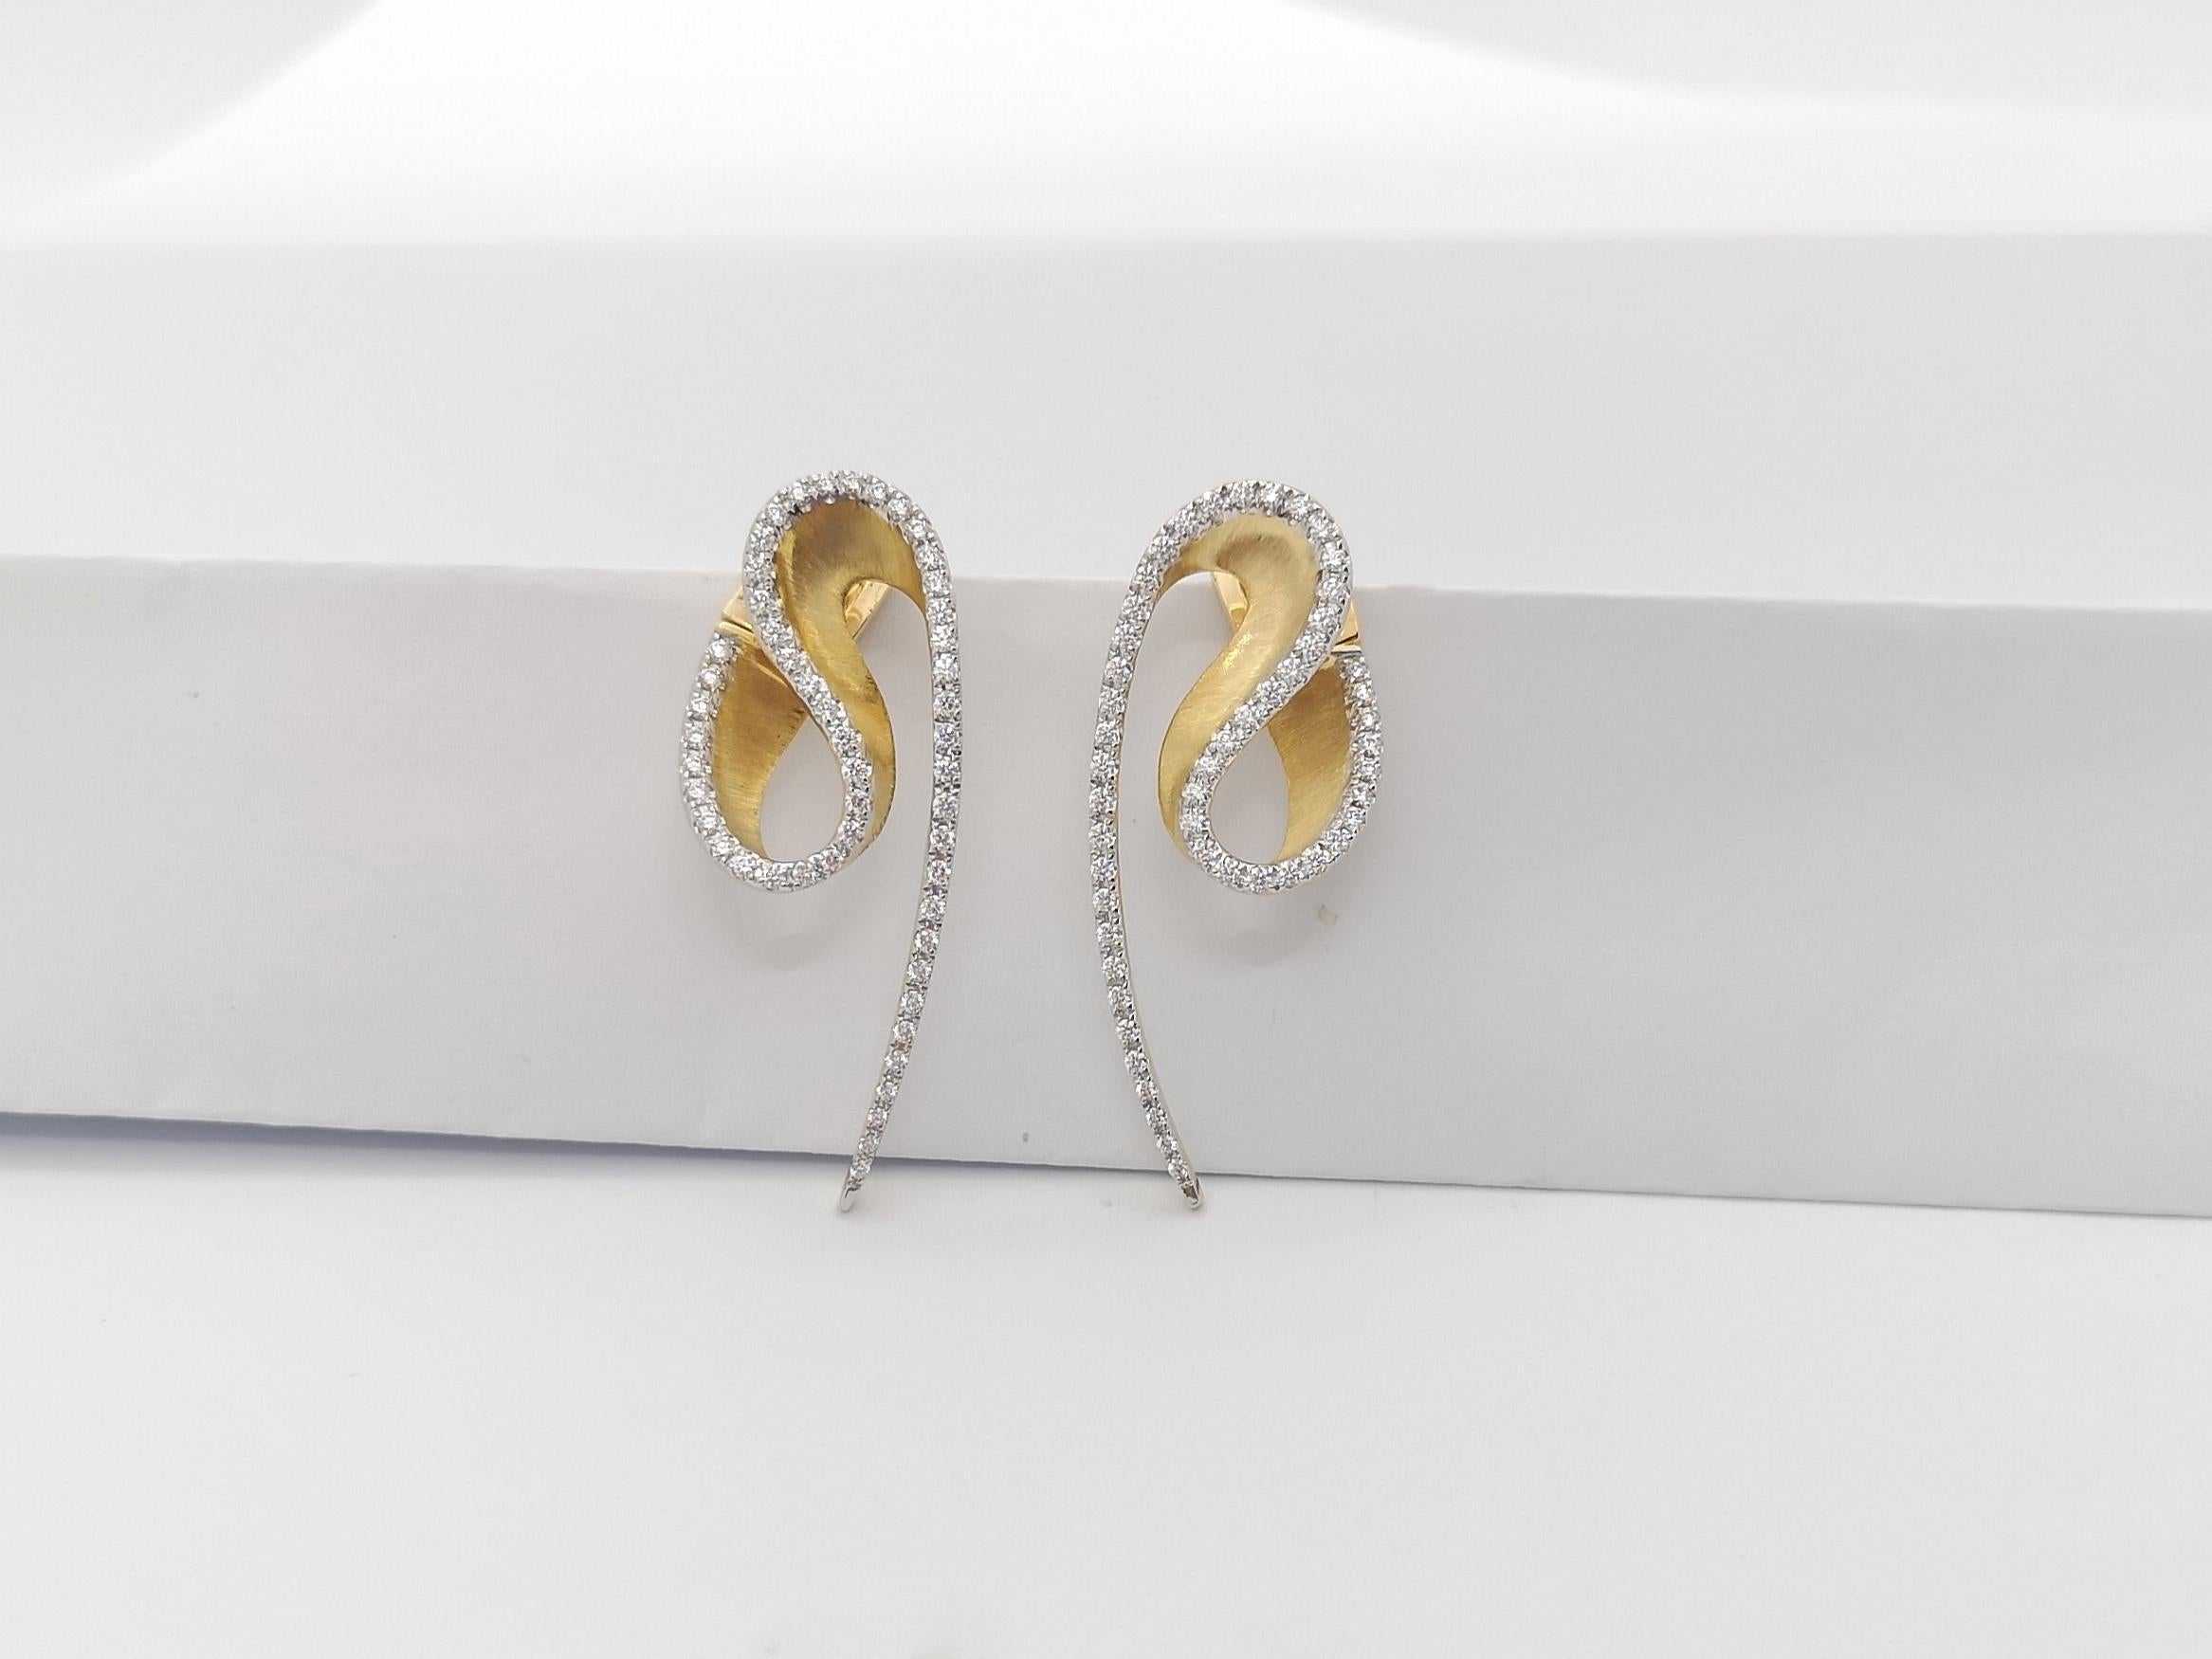 Diamond Earrings 18K Gold

Width: 1.3 cm
Length: 1.6 cm
Weight: 3.07 grams

Talay explores the sea’s ephemeral character and rightfully captures the essence of the sea. From the colorful ocean floor to the crashing waves, the collection embodies